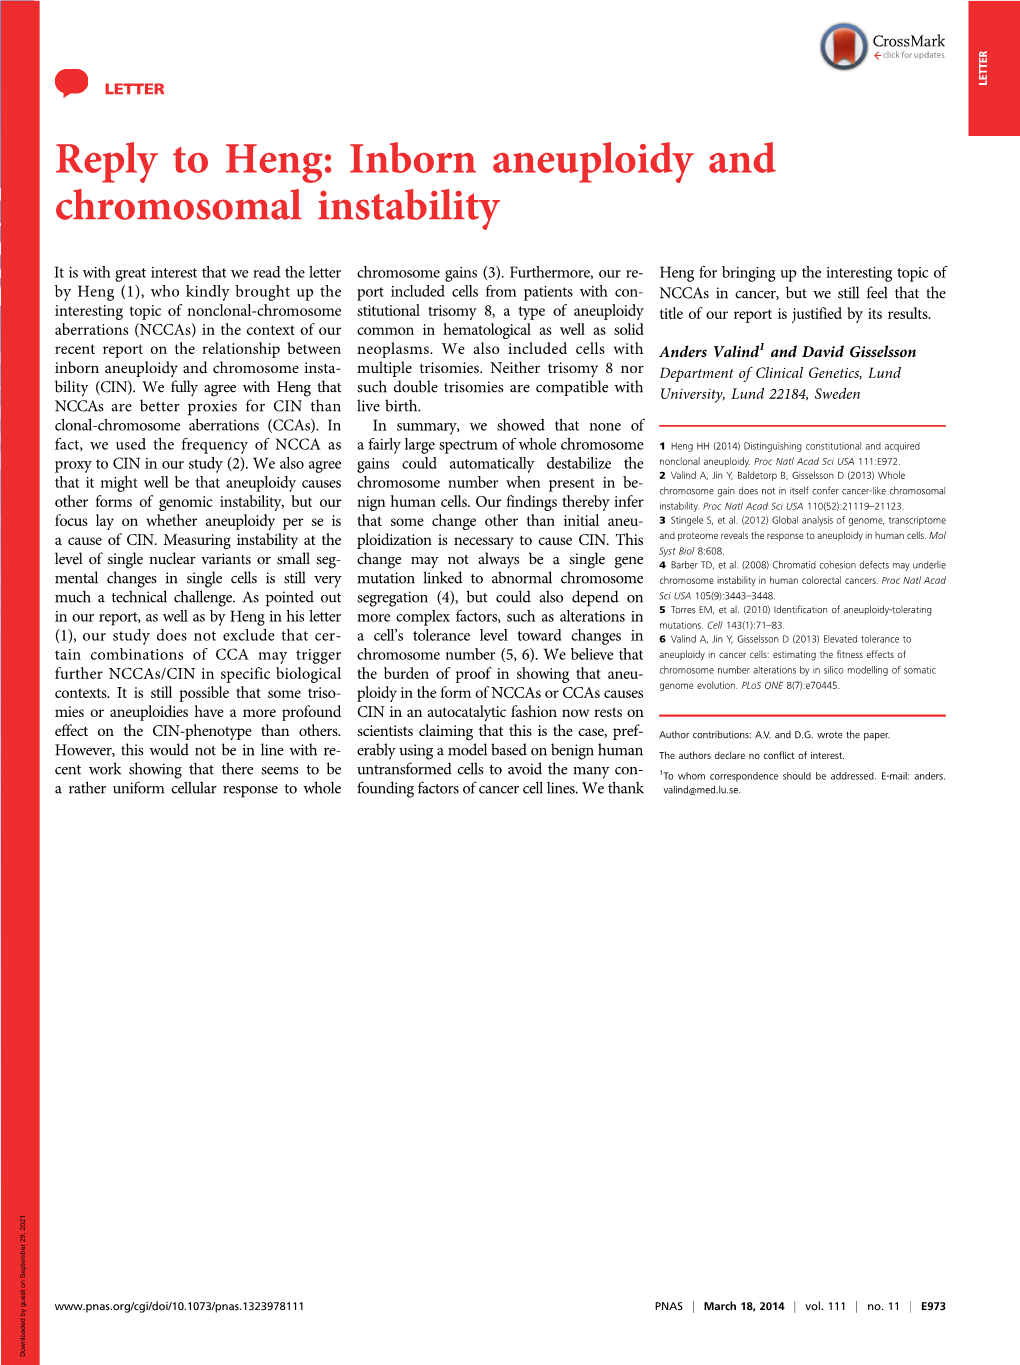 Reply to Heng: Inborn Aneuploidy and Chromosomal Instability